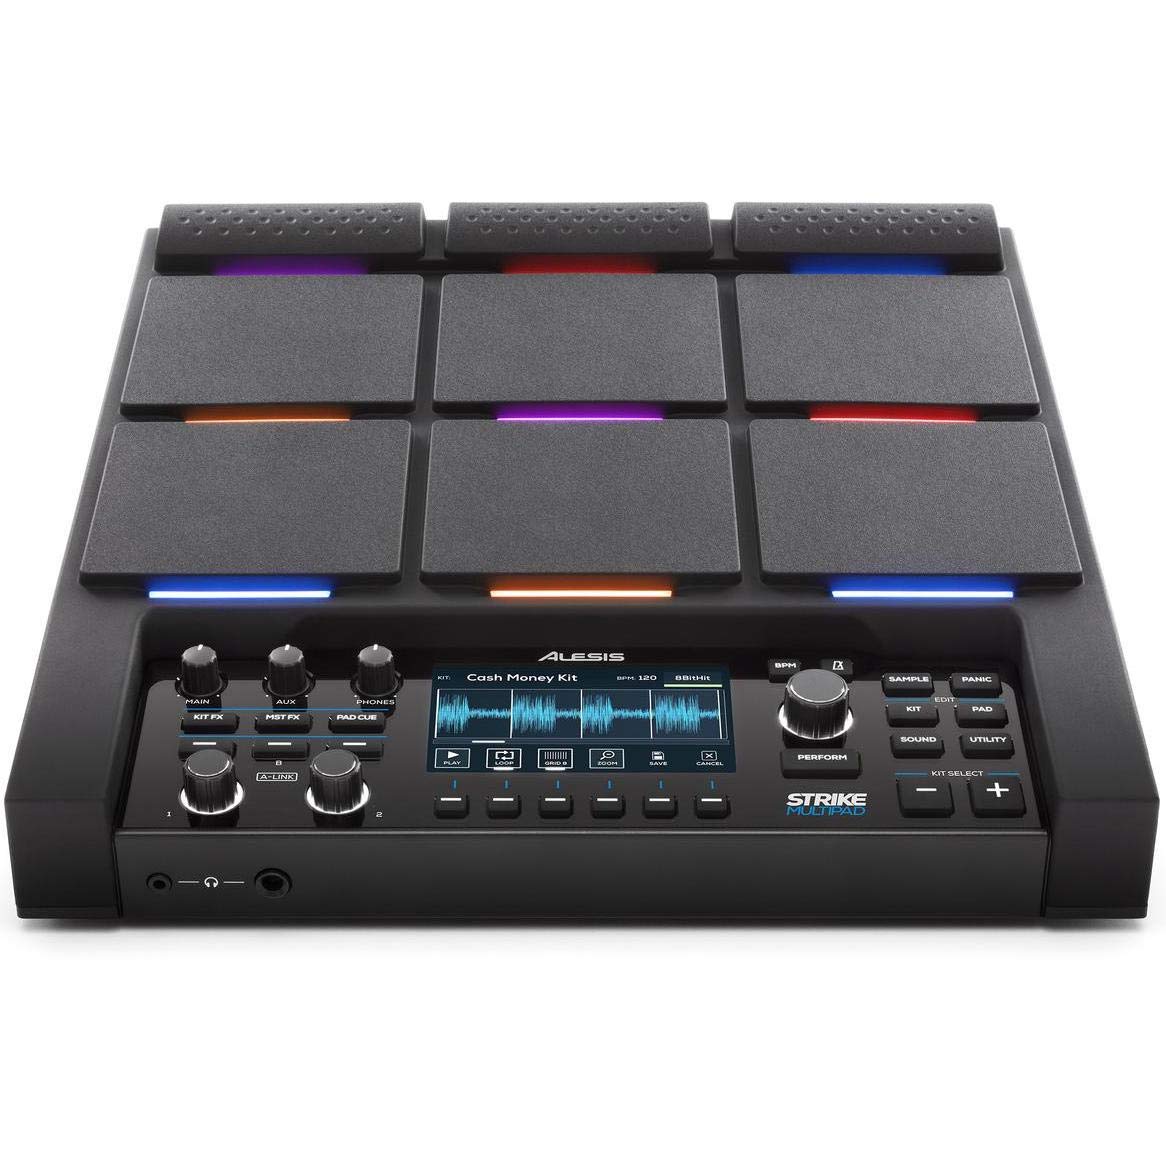 Alesis Strike Multipad | 9-Trigger Percussion Pad with RGB Backlighting, Sampler, Looper, On-Board 2-In/2-Out Soundcard, Sample loading via USB Thumb Drives